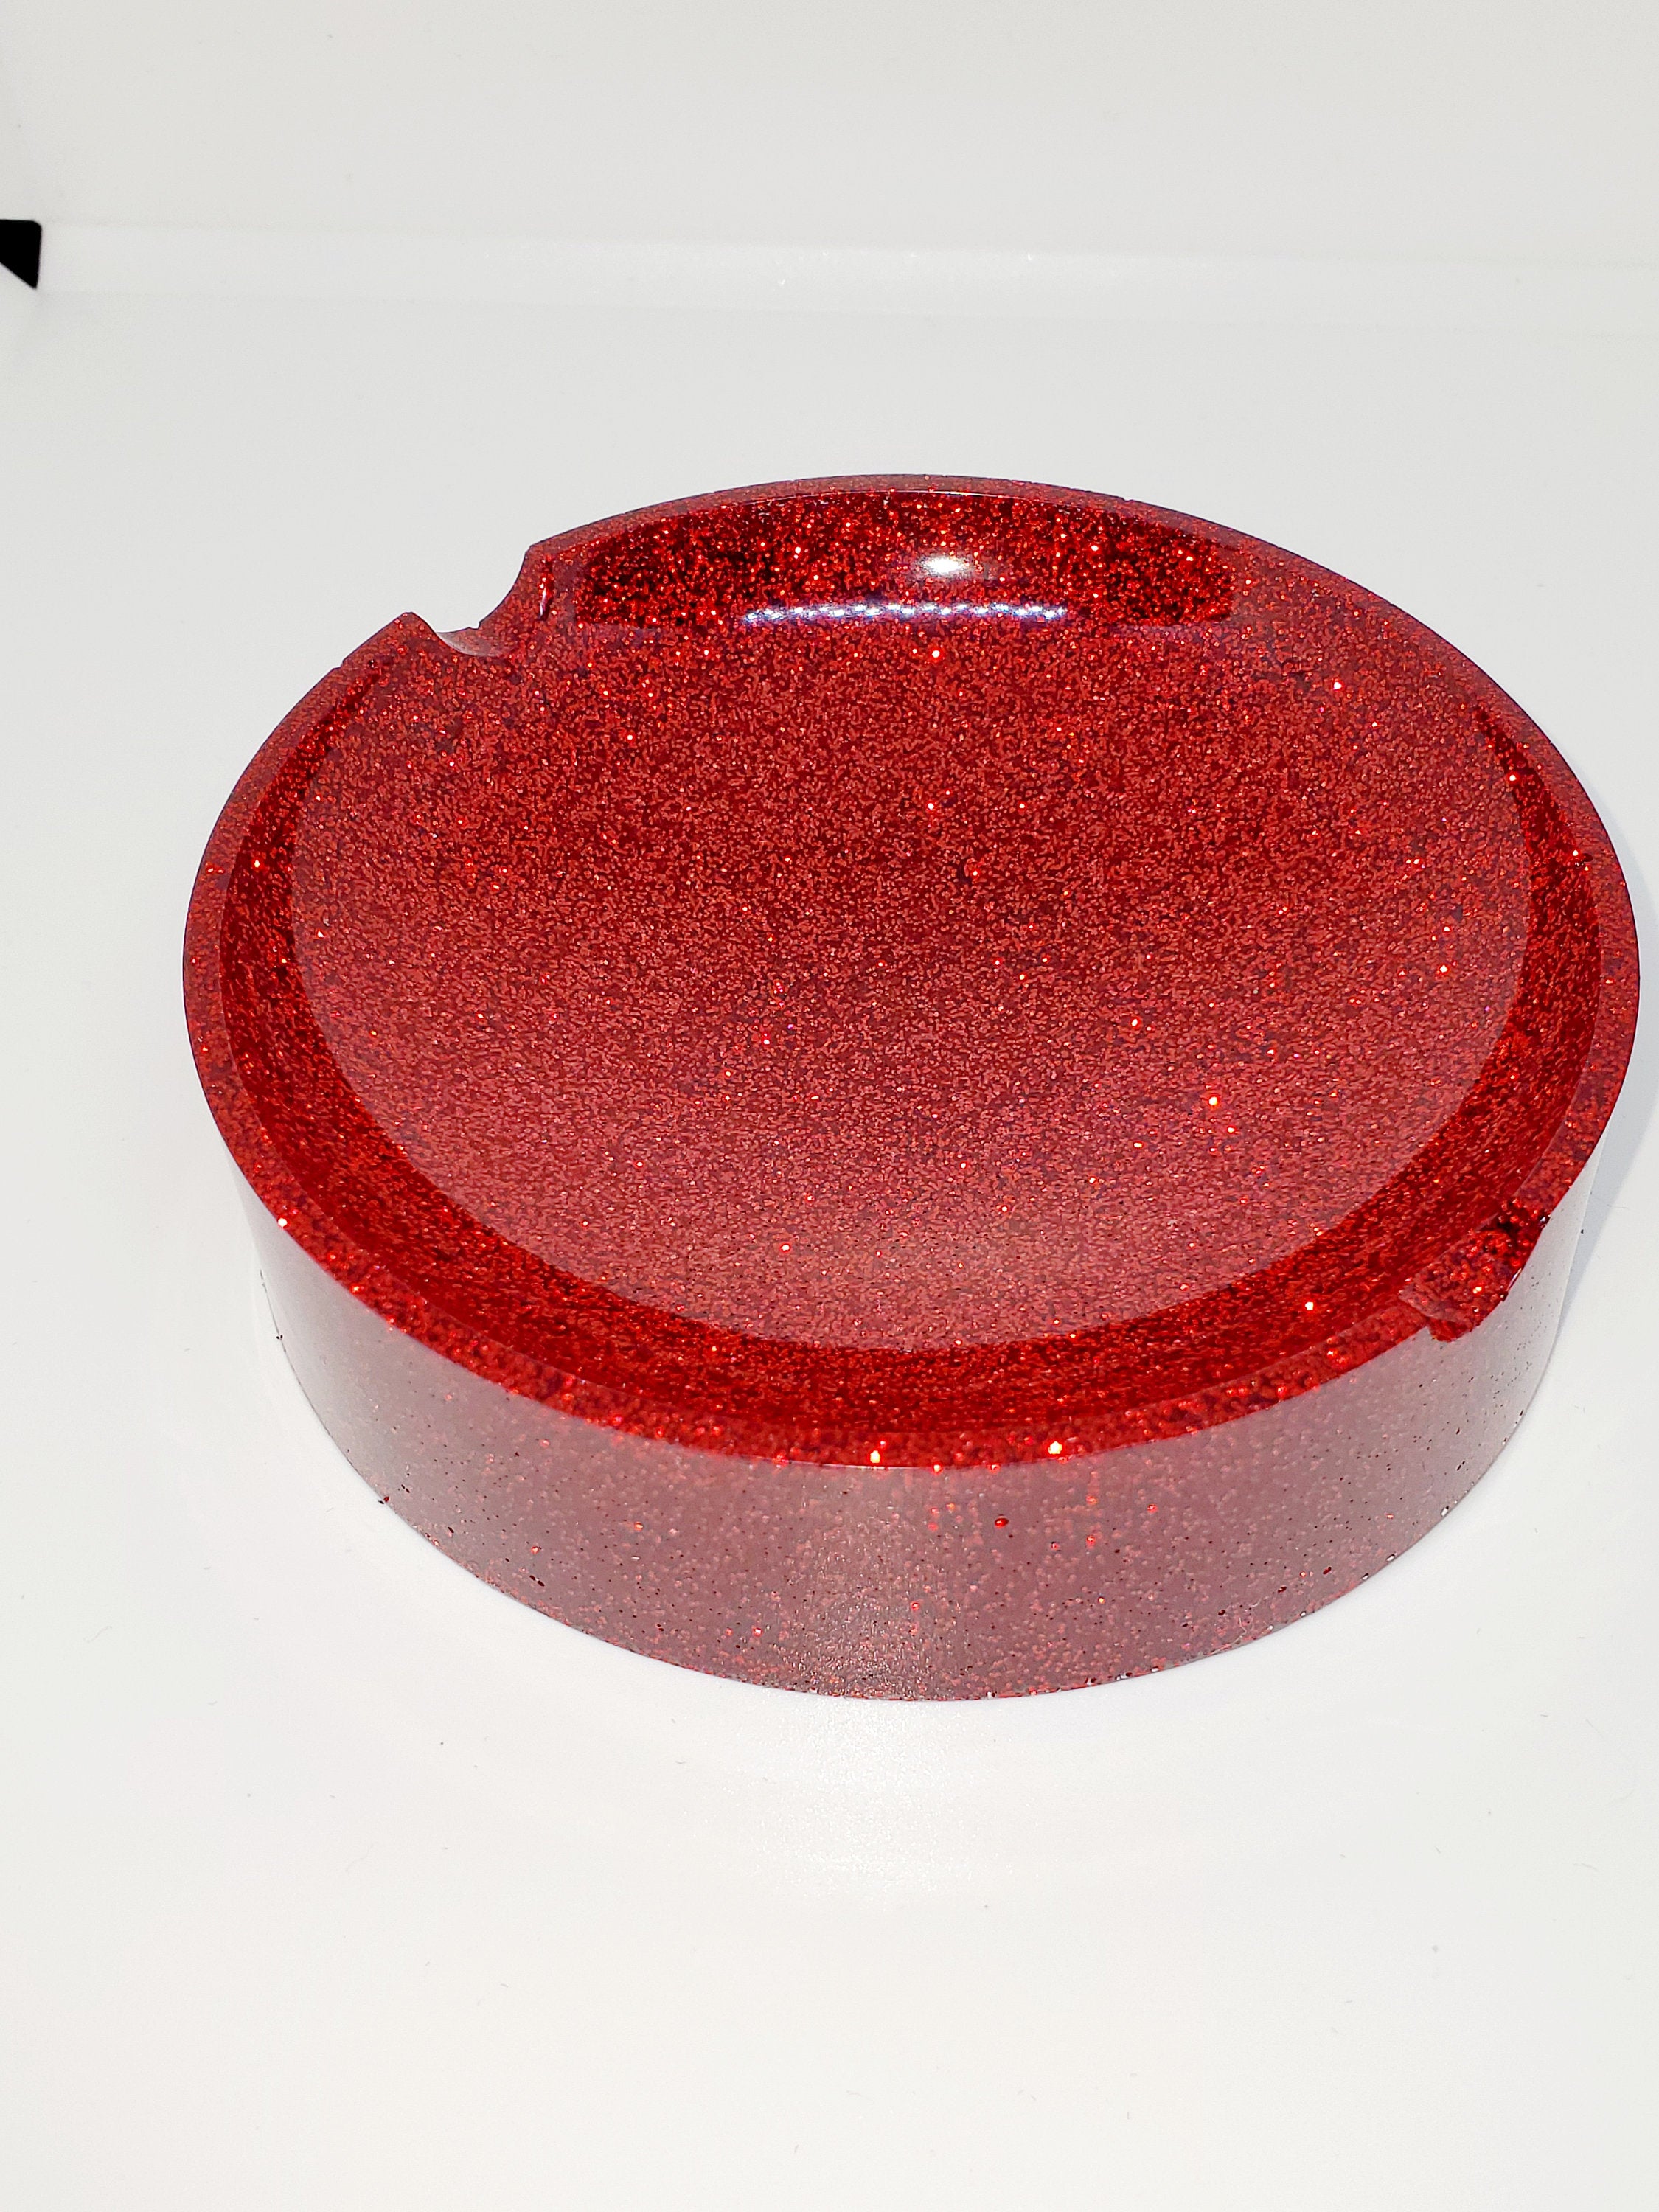 Red Glitter Soap Dish or Ash Tray - Gypsy Rae Boutique